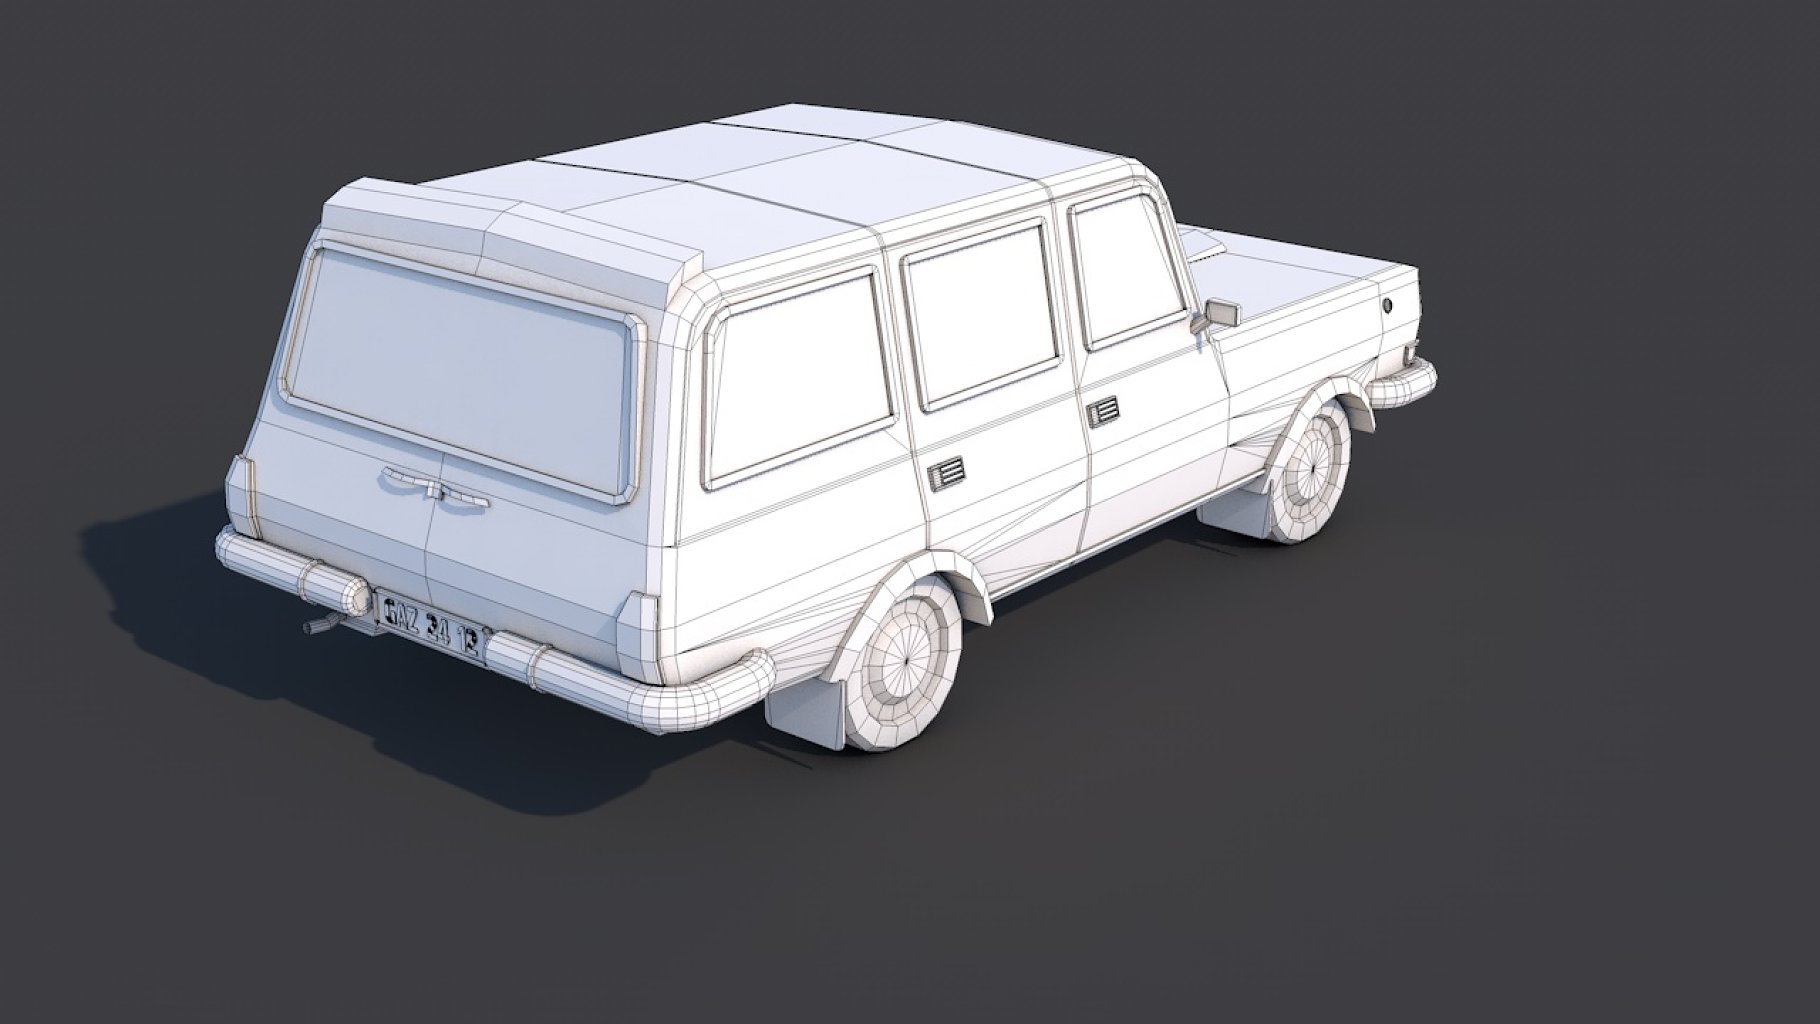 Gray low poly city car back graphic mockup on a dark gray background.